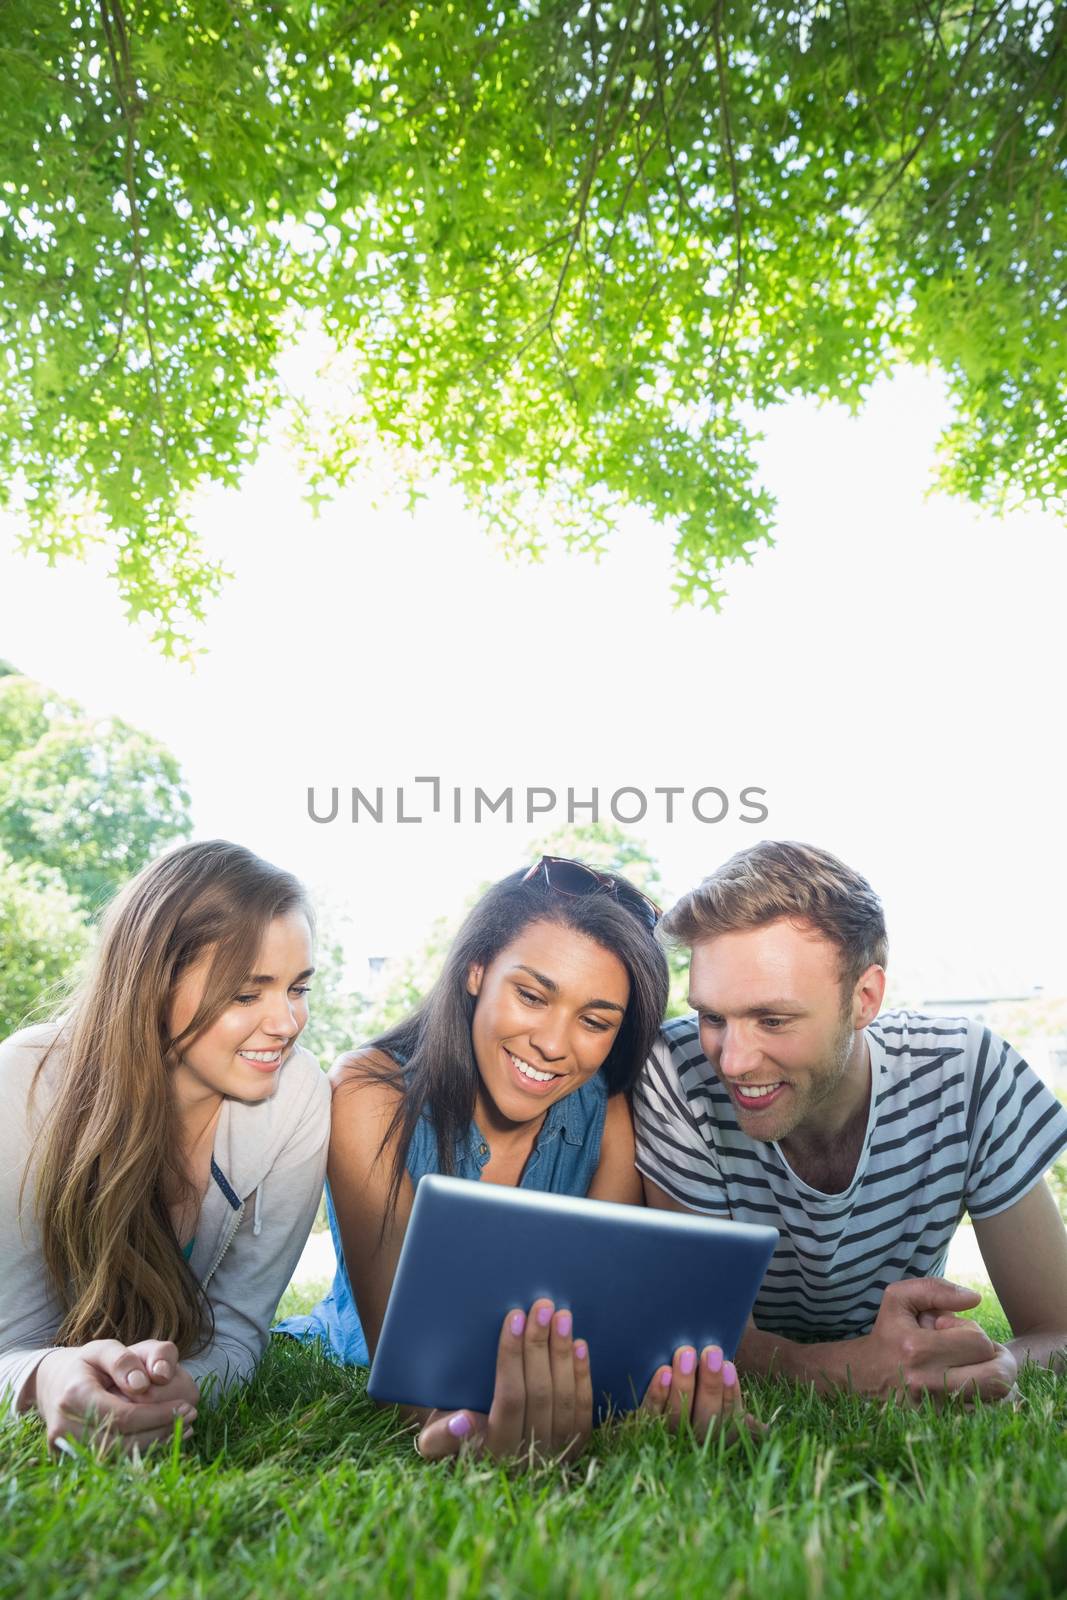 Happy students using tablet pc outside at the university